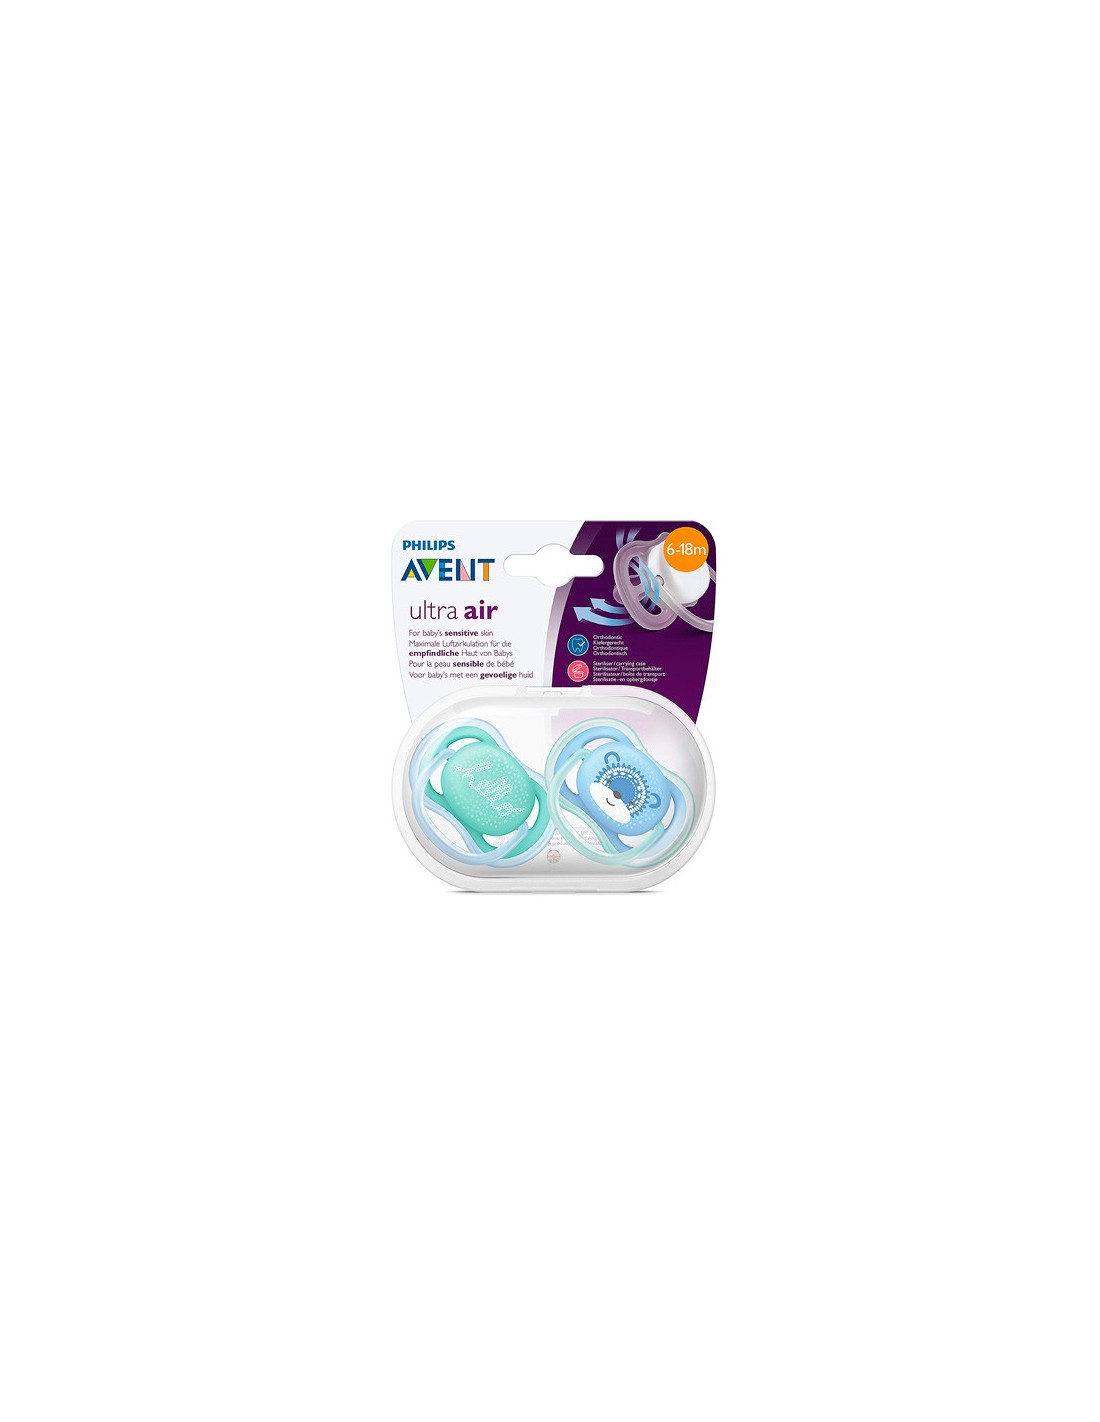 Avent Sucettes Silicone Ultra air X2 6-18 mois